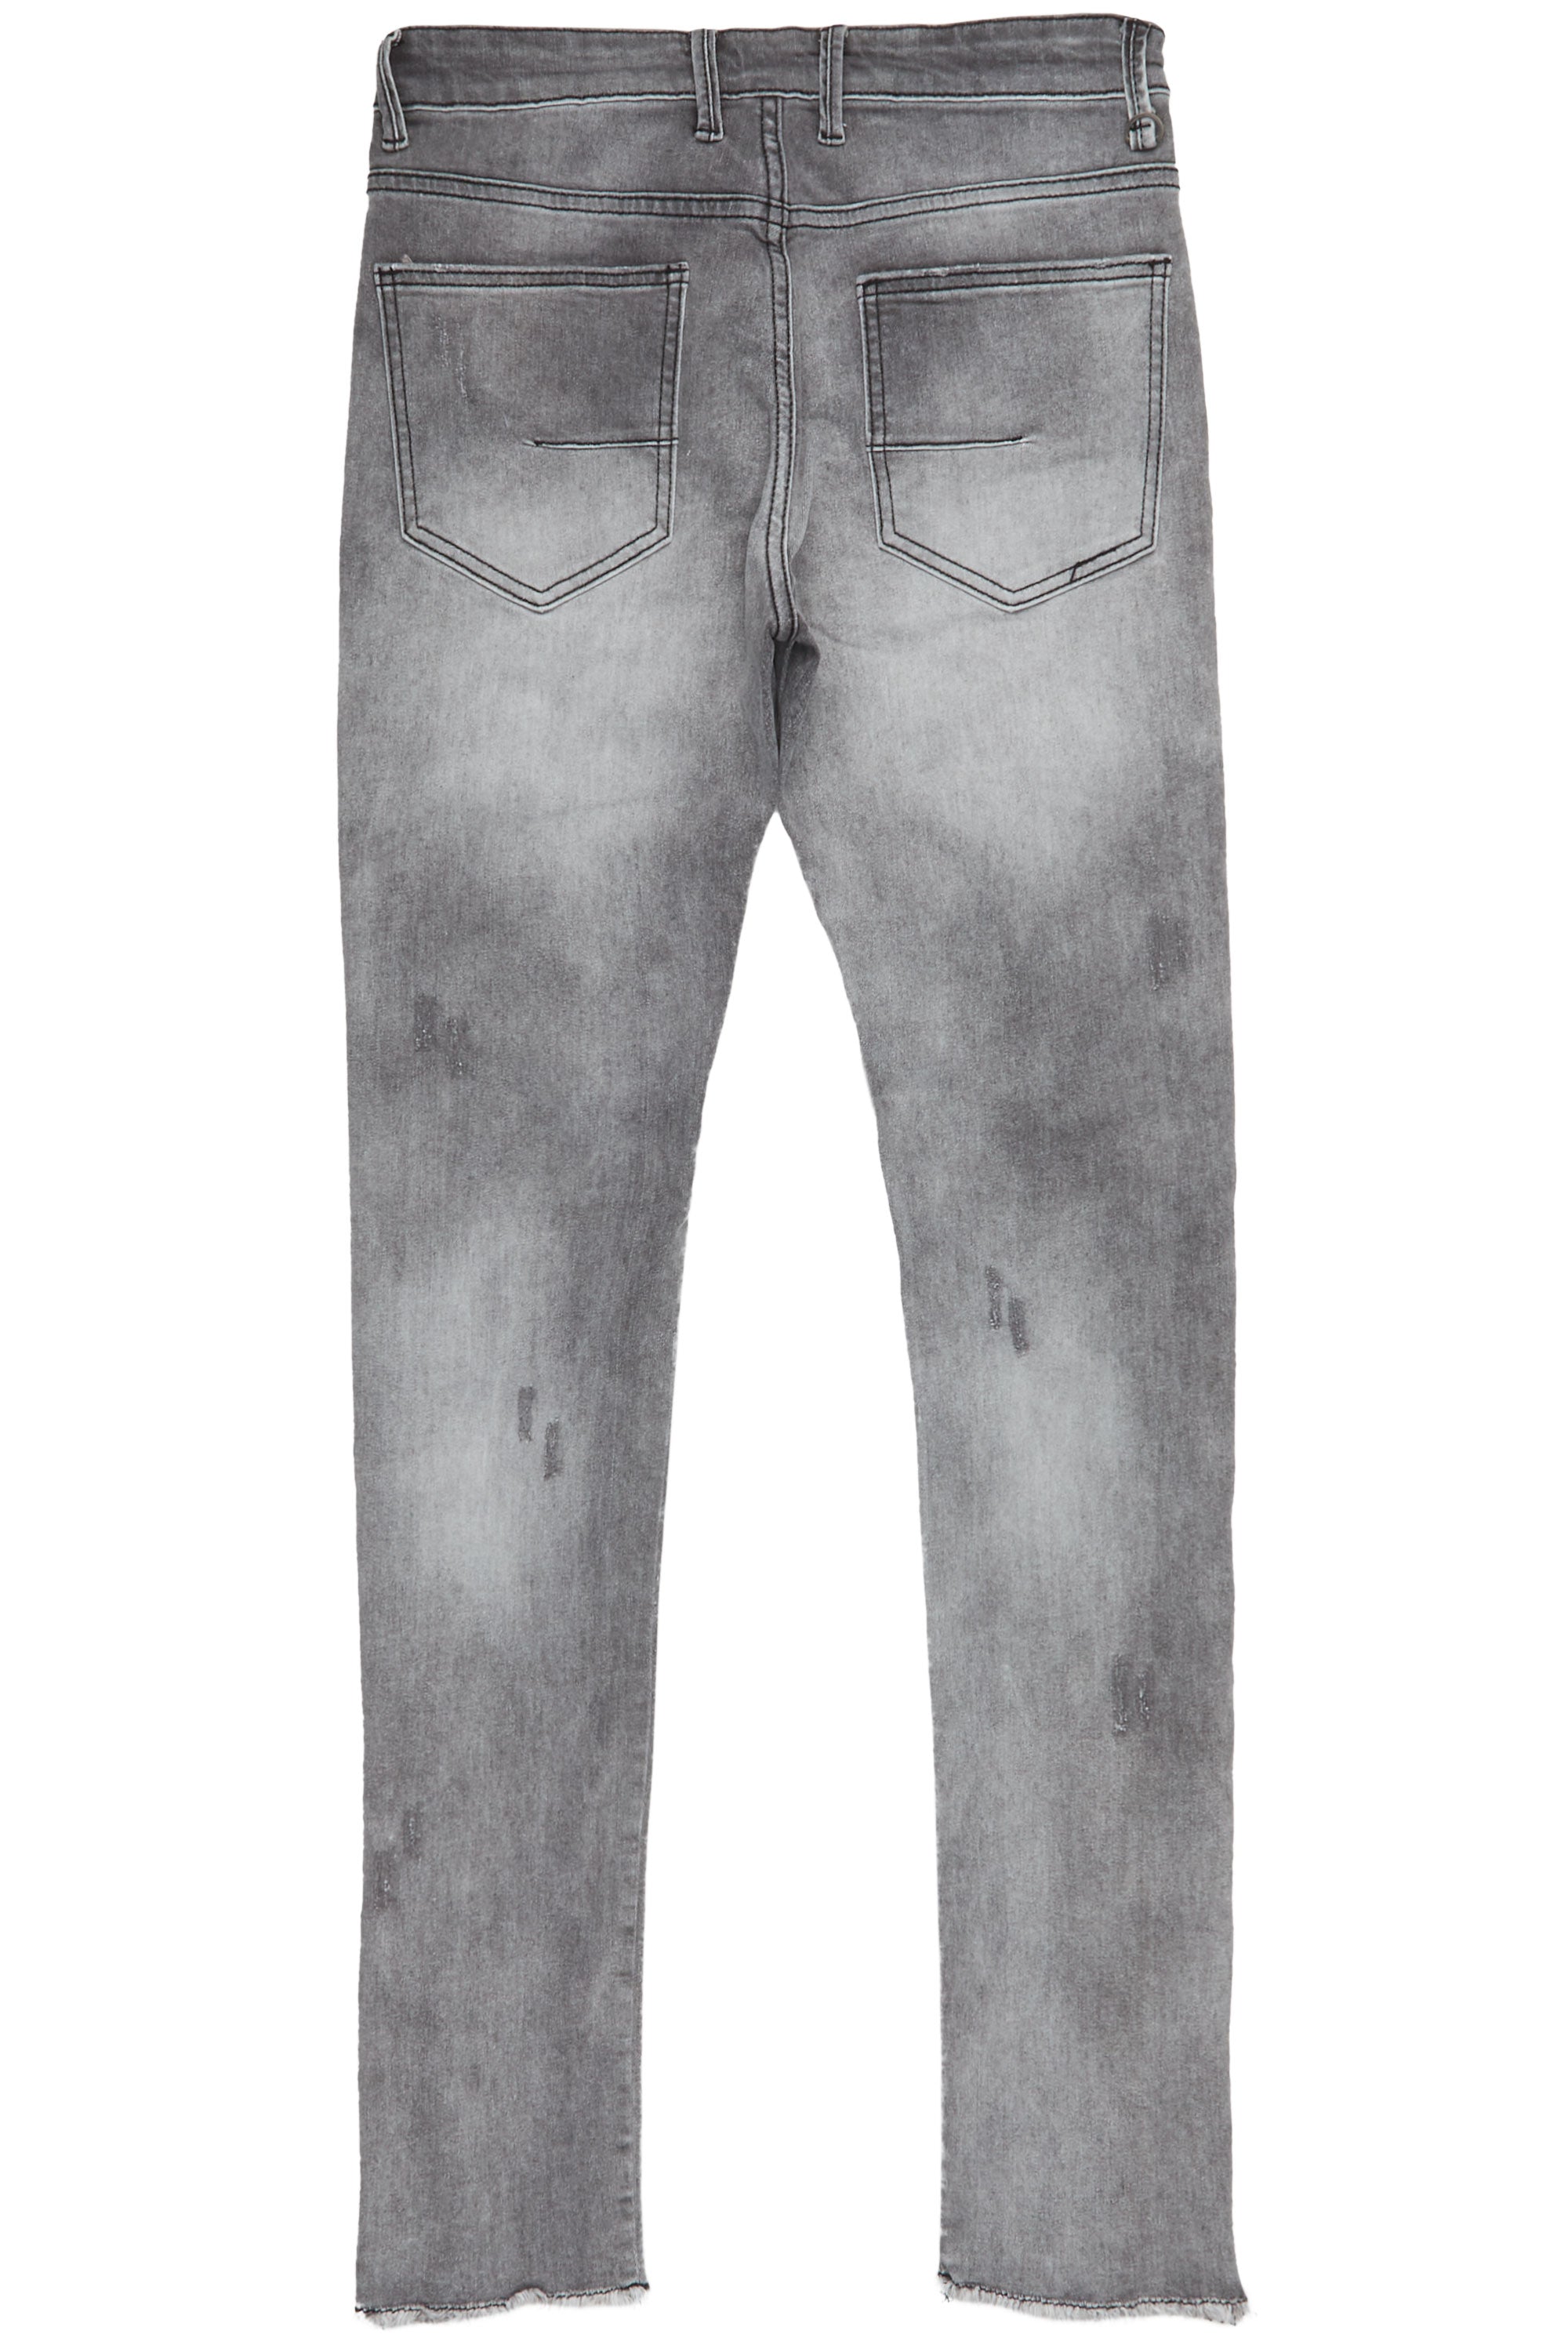 Quico Grey Stacked Flare Jean